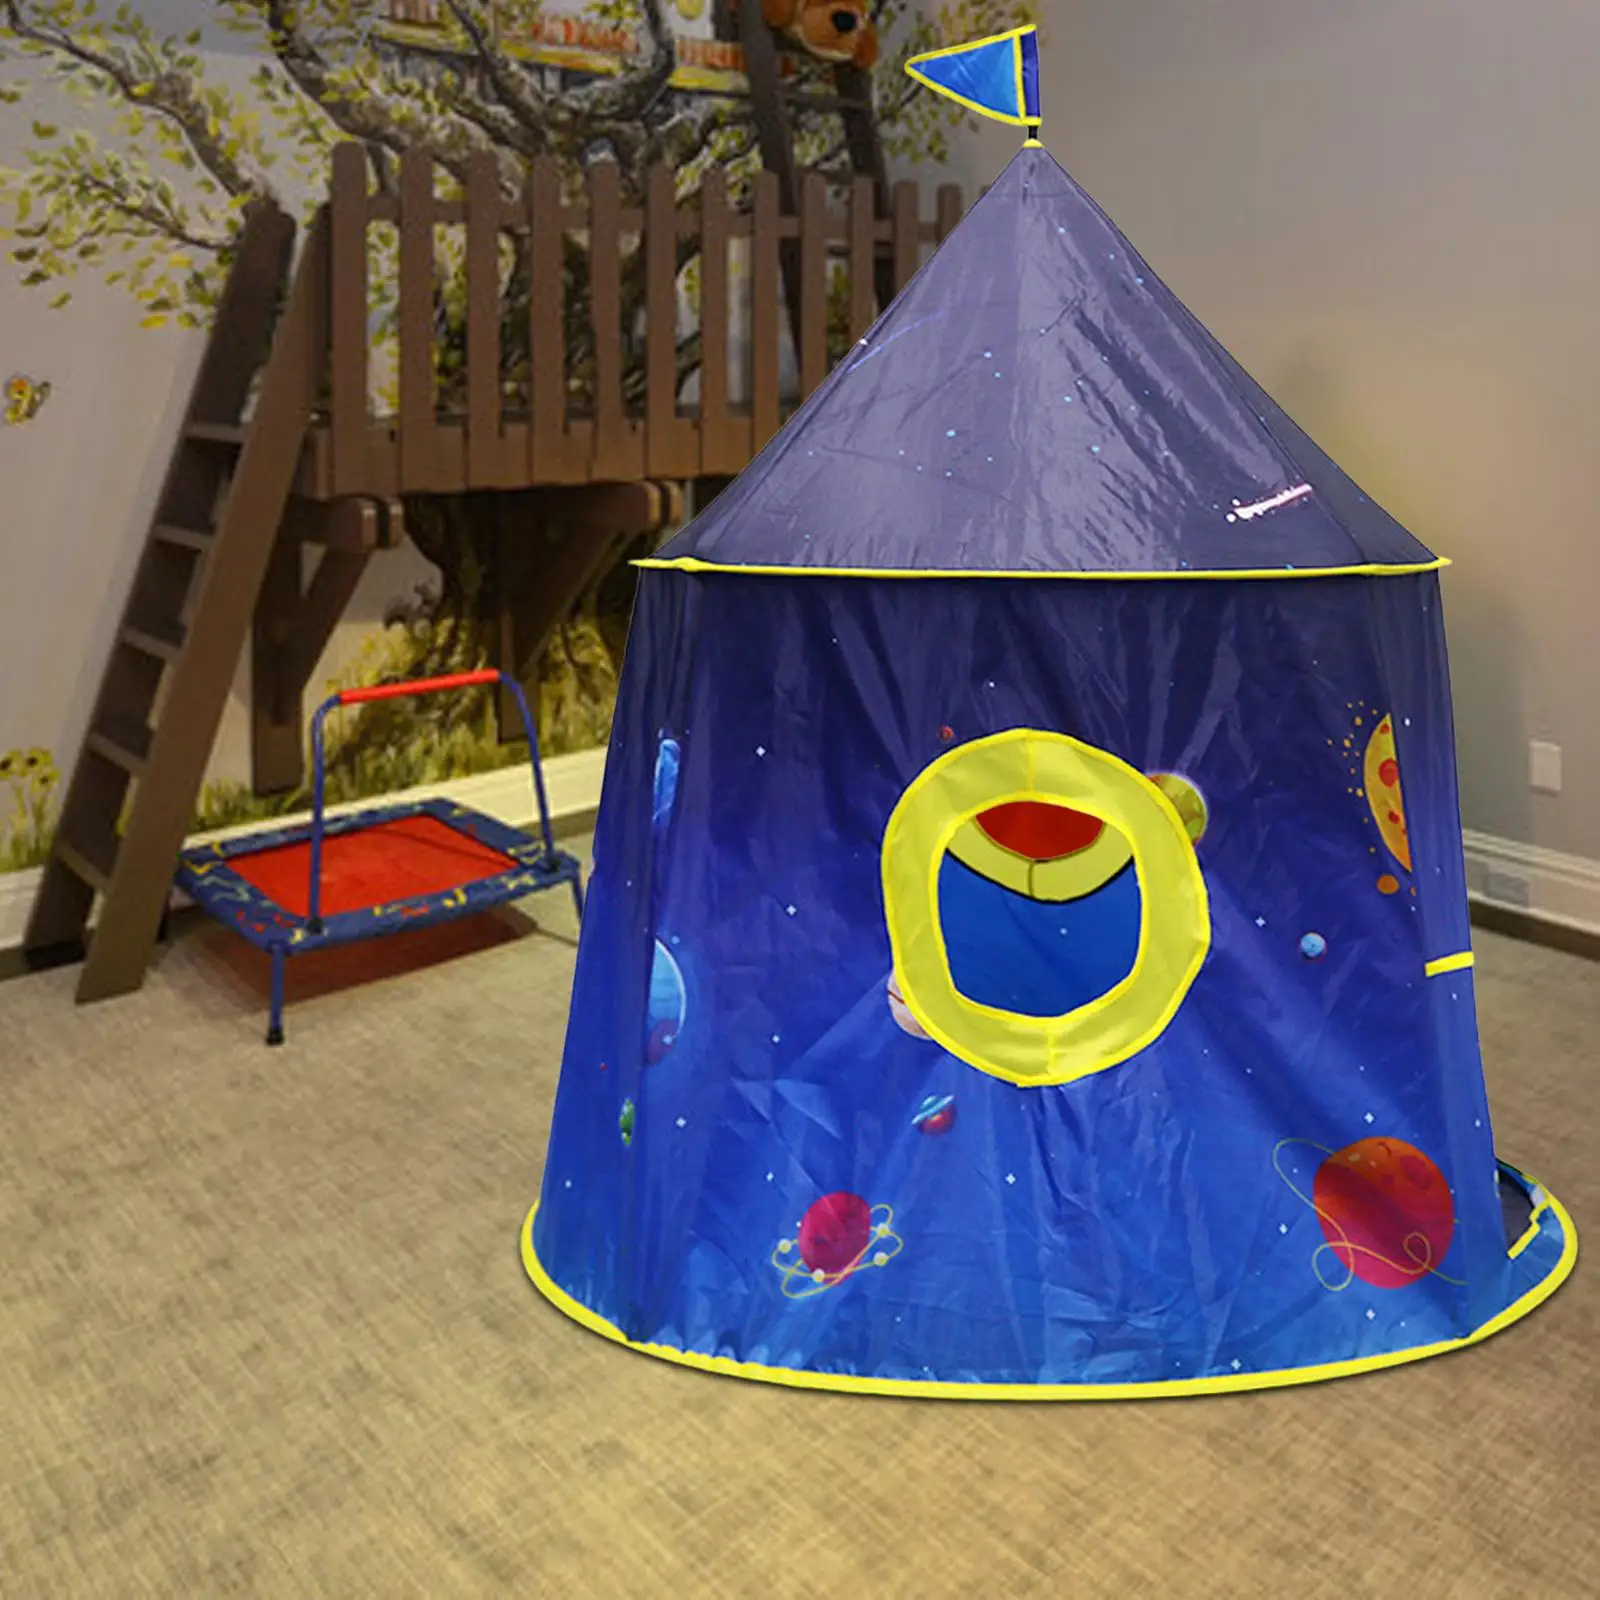 Space Themed Play Tent Foldable Outer Space Rocket Kids Play House Playhouse Tent Spaceship Tent for Indoor Boy Girl Gifts